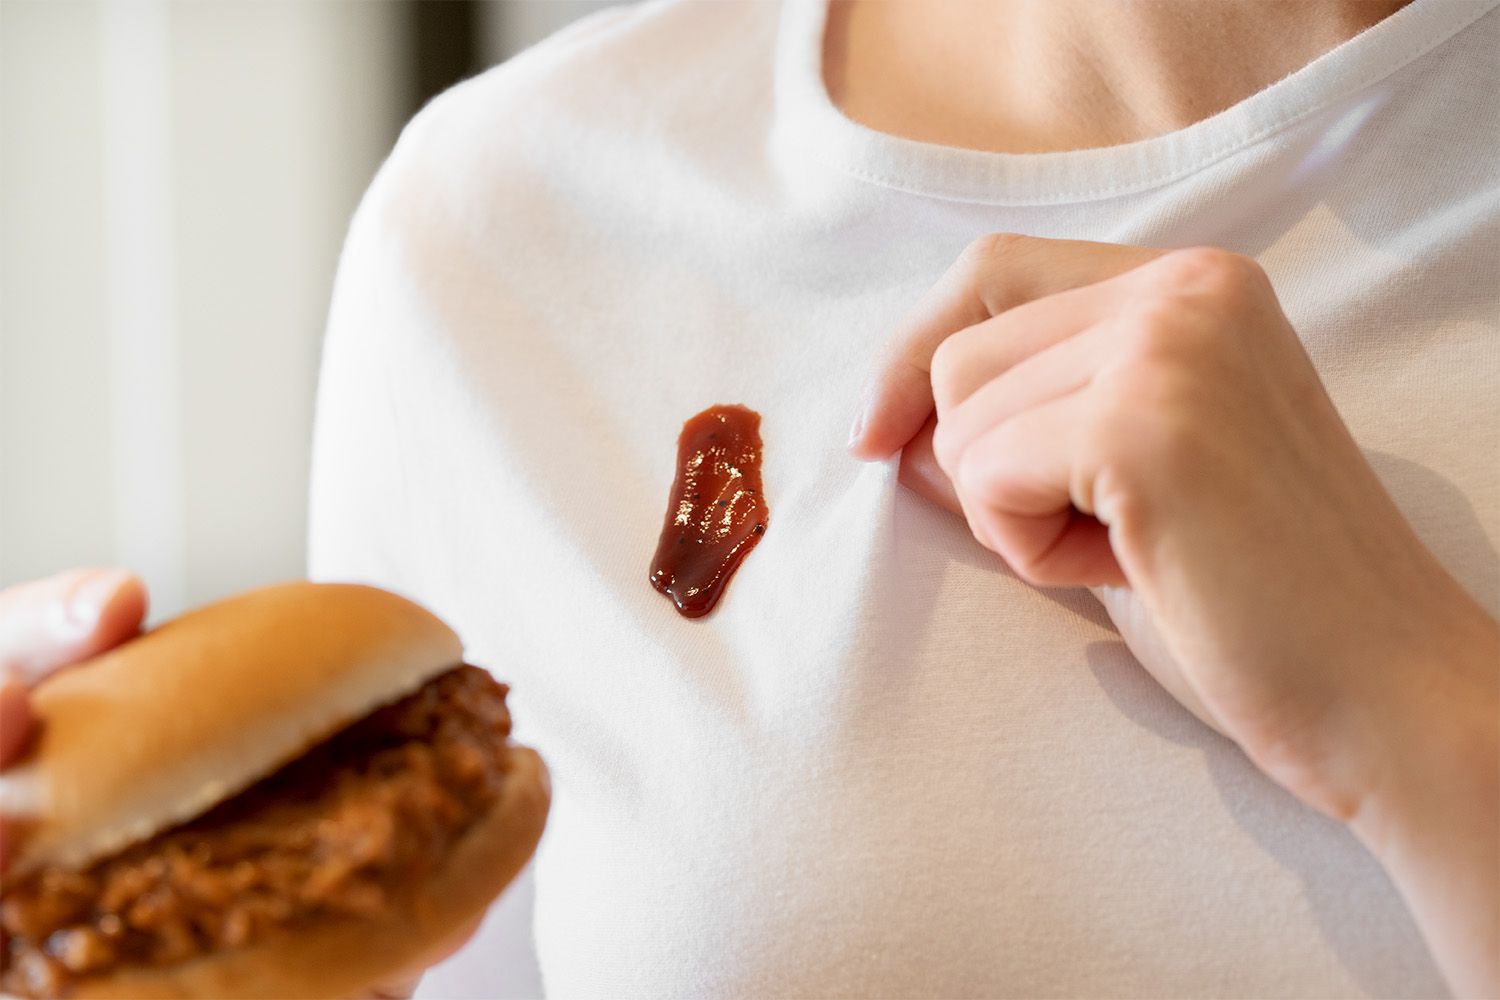 6 Steps to Remove Barbecue Sauce Stains From Clothing